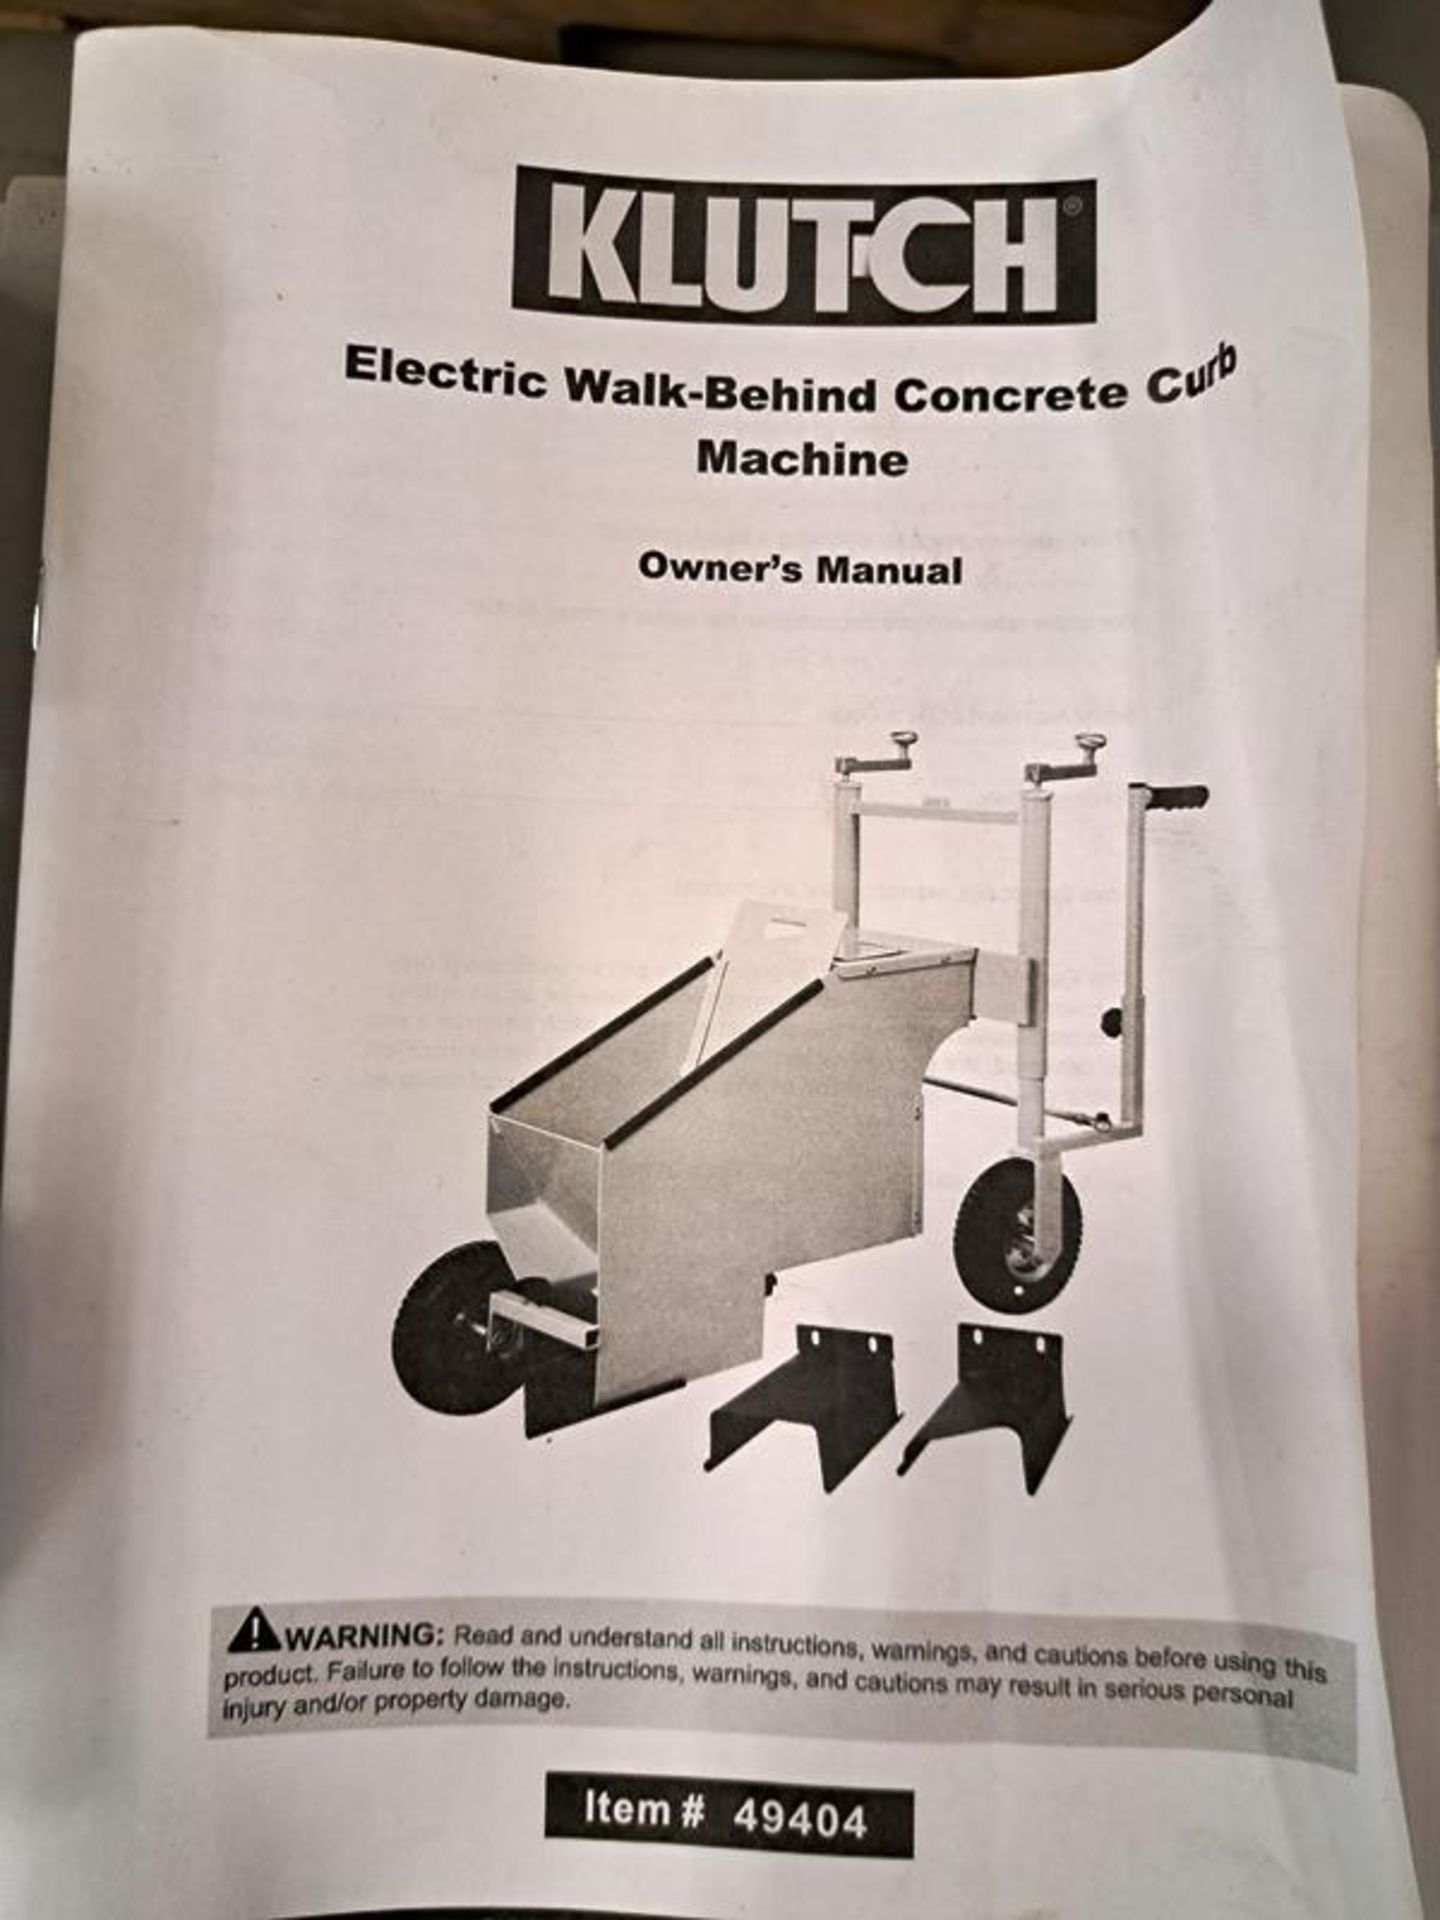 Klutch Mdl. 49404 Electric Concrete Curb Machine, 120 volts (Required Loading Fee: $25.00) NO HAND - Image 5 of 5